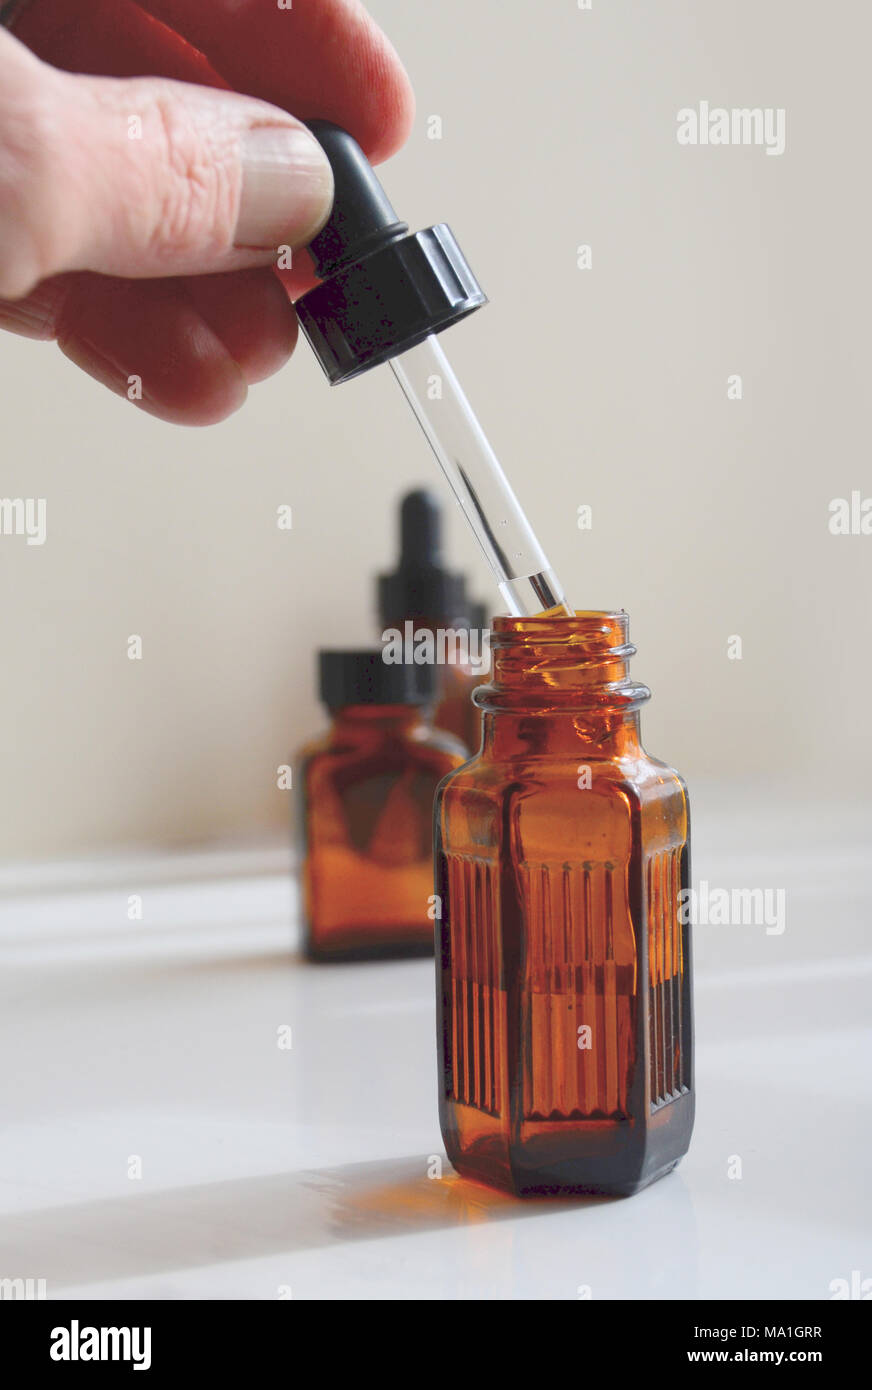 A person draws medicinal oil up a pipette from an amber bottle. Stock Photo